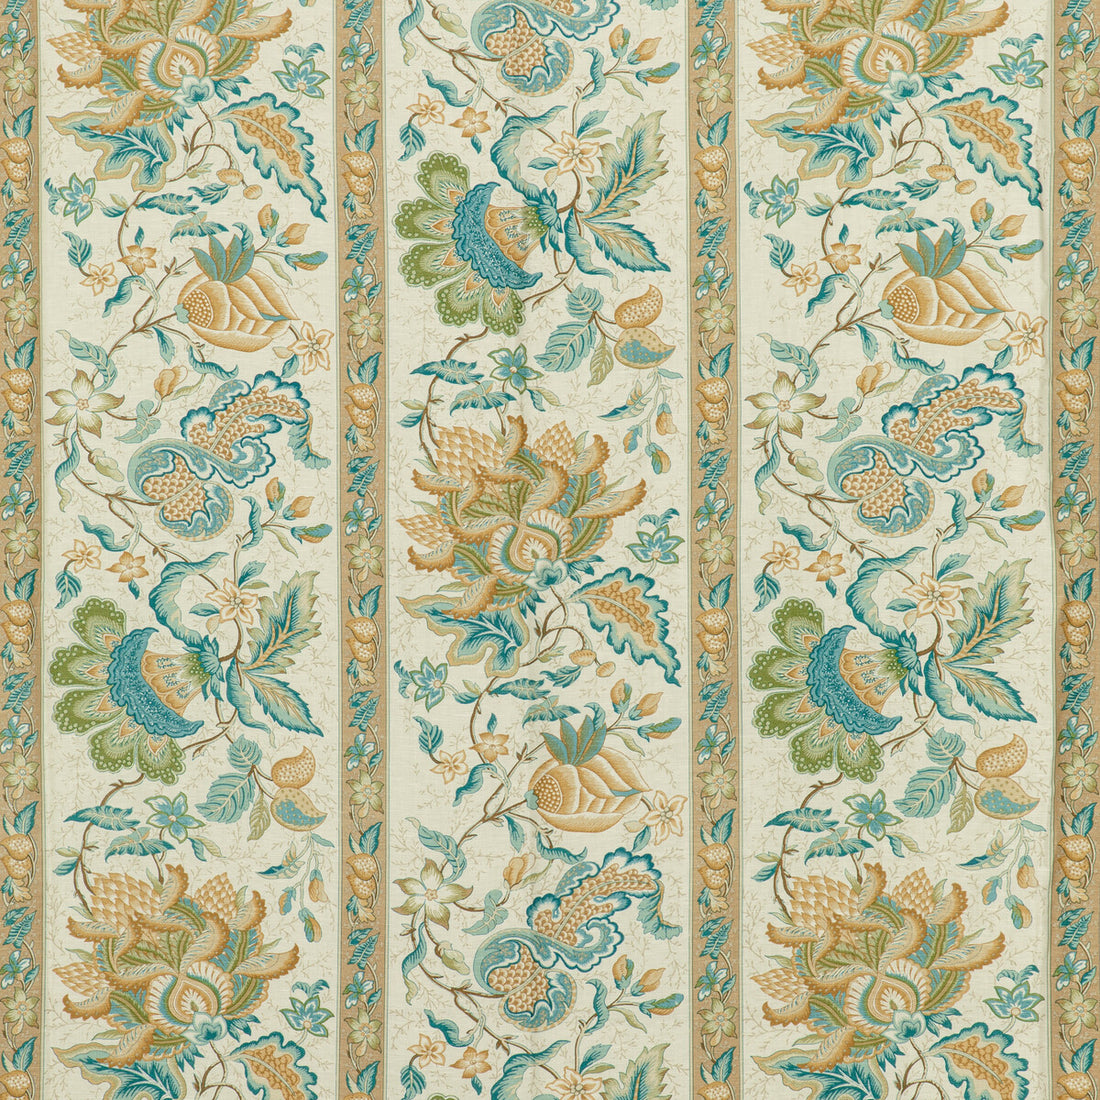 Montflours Print fabric in aqua color - pattern 8020120.13.0 - by Brunschwig &amp; Fils in the Louverne collection